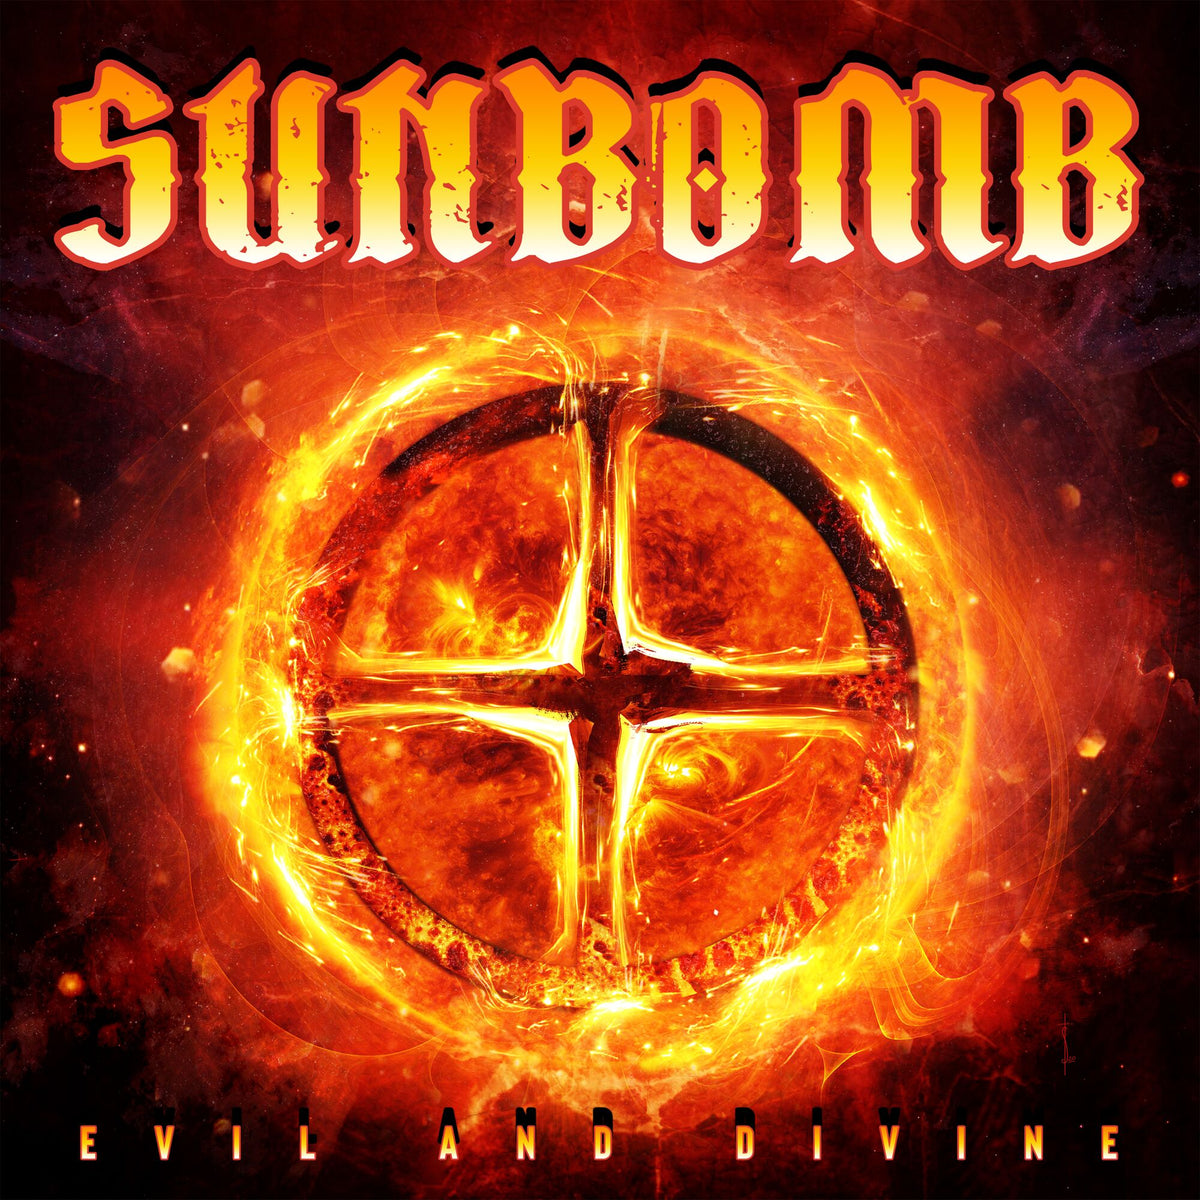 Sunbomb - Evil And Divine - FRCD1112